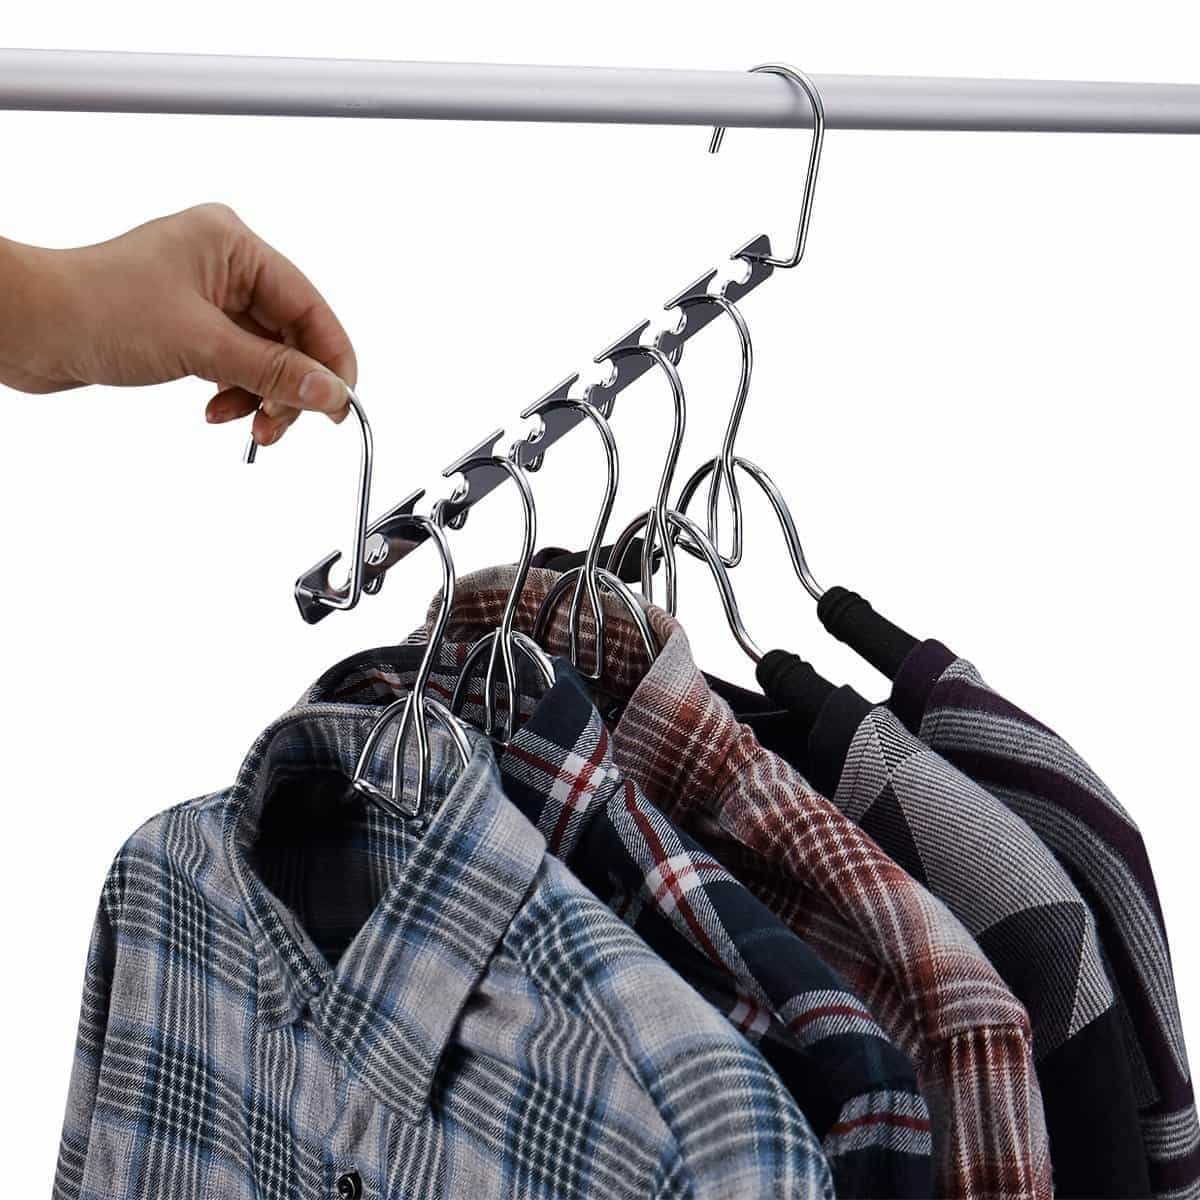 On amazon doiown space saving hangers 4 pack closet organizer hanger stainless steel clothing hangers 4 pack